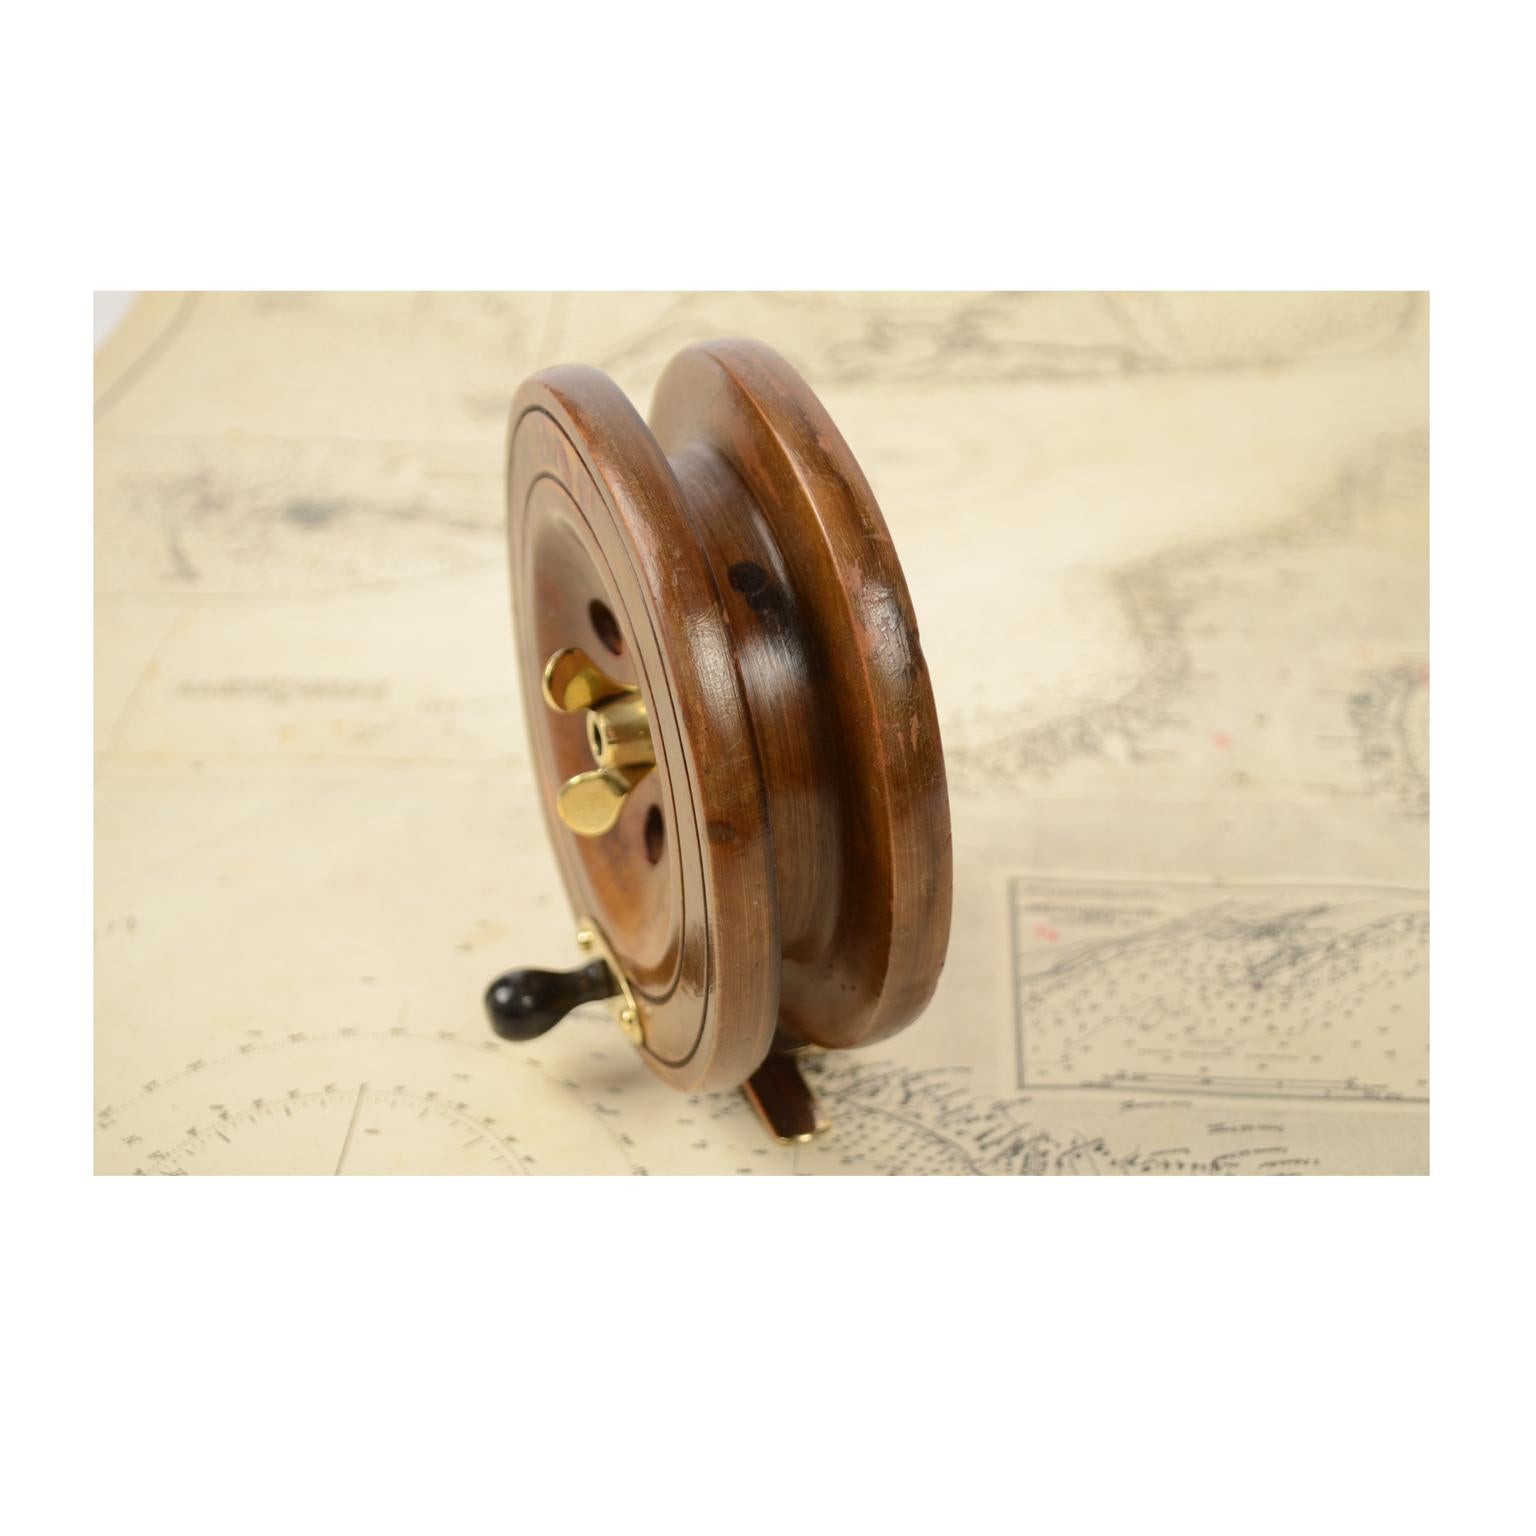 British Fishing Reel of Turned Oak and Brass, 1900